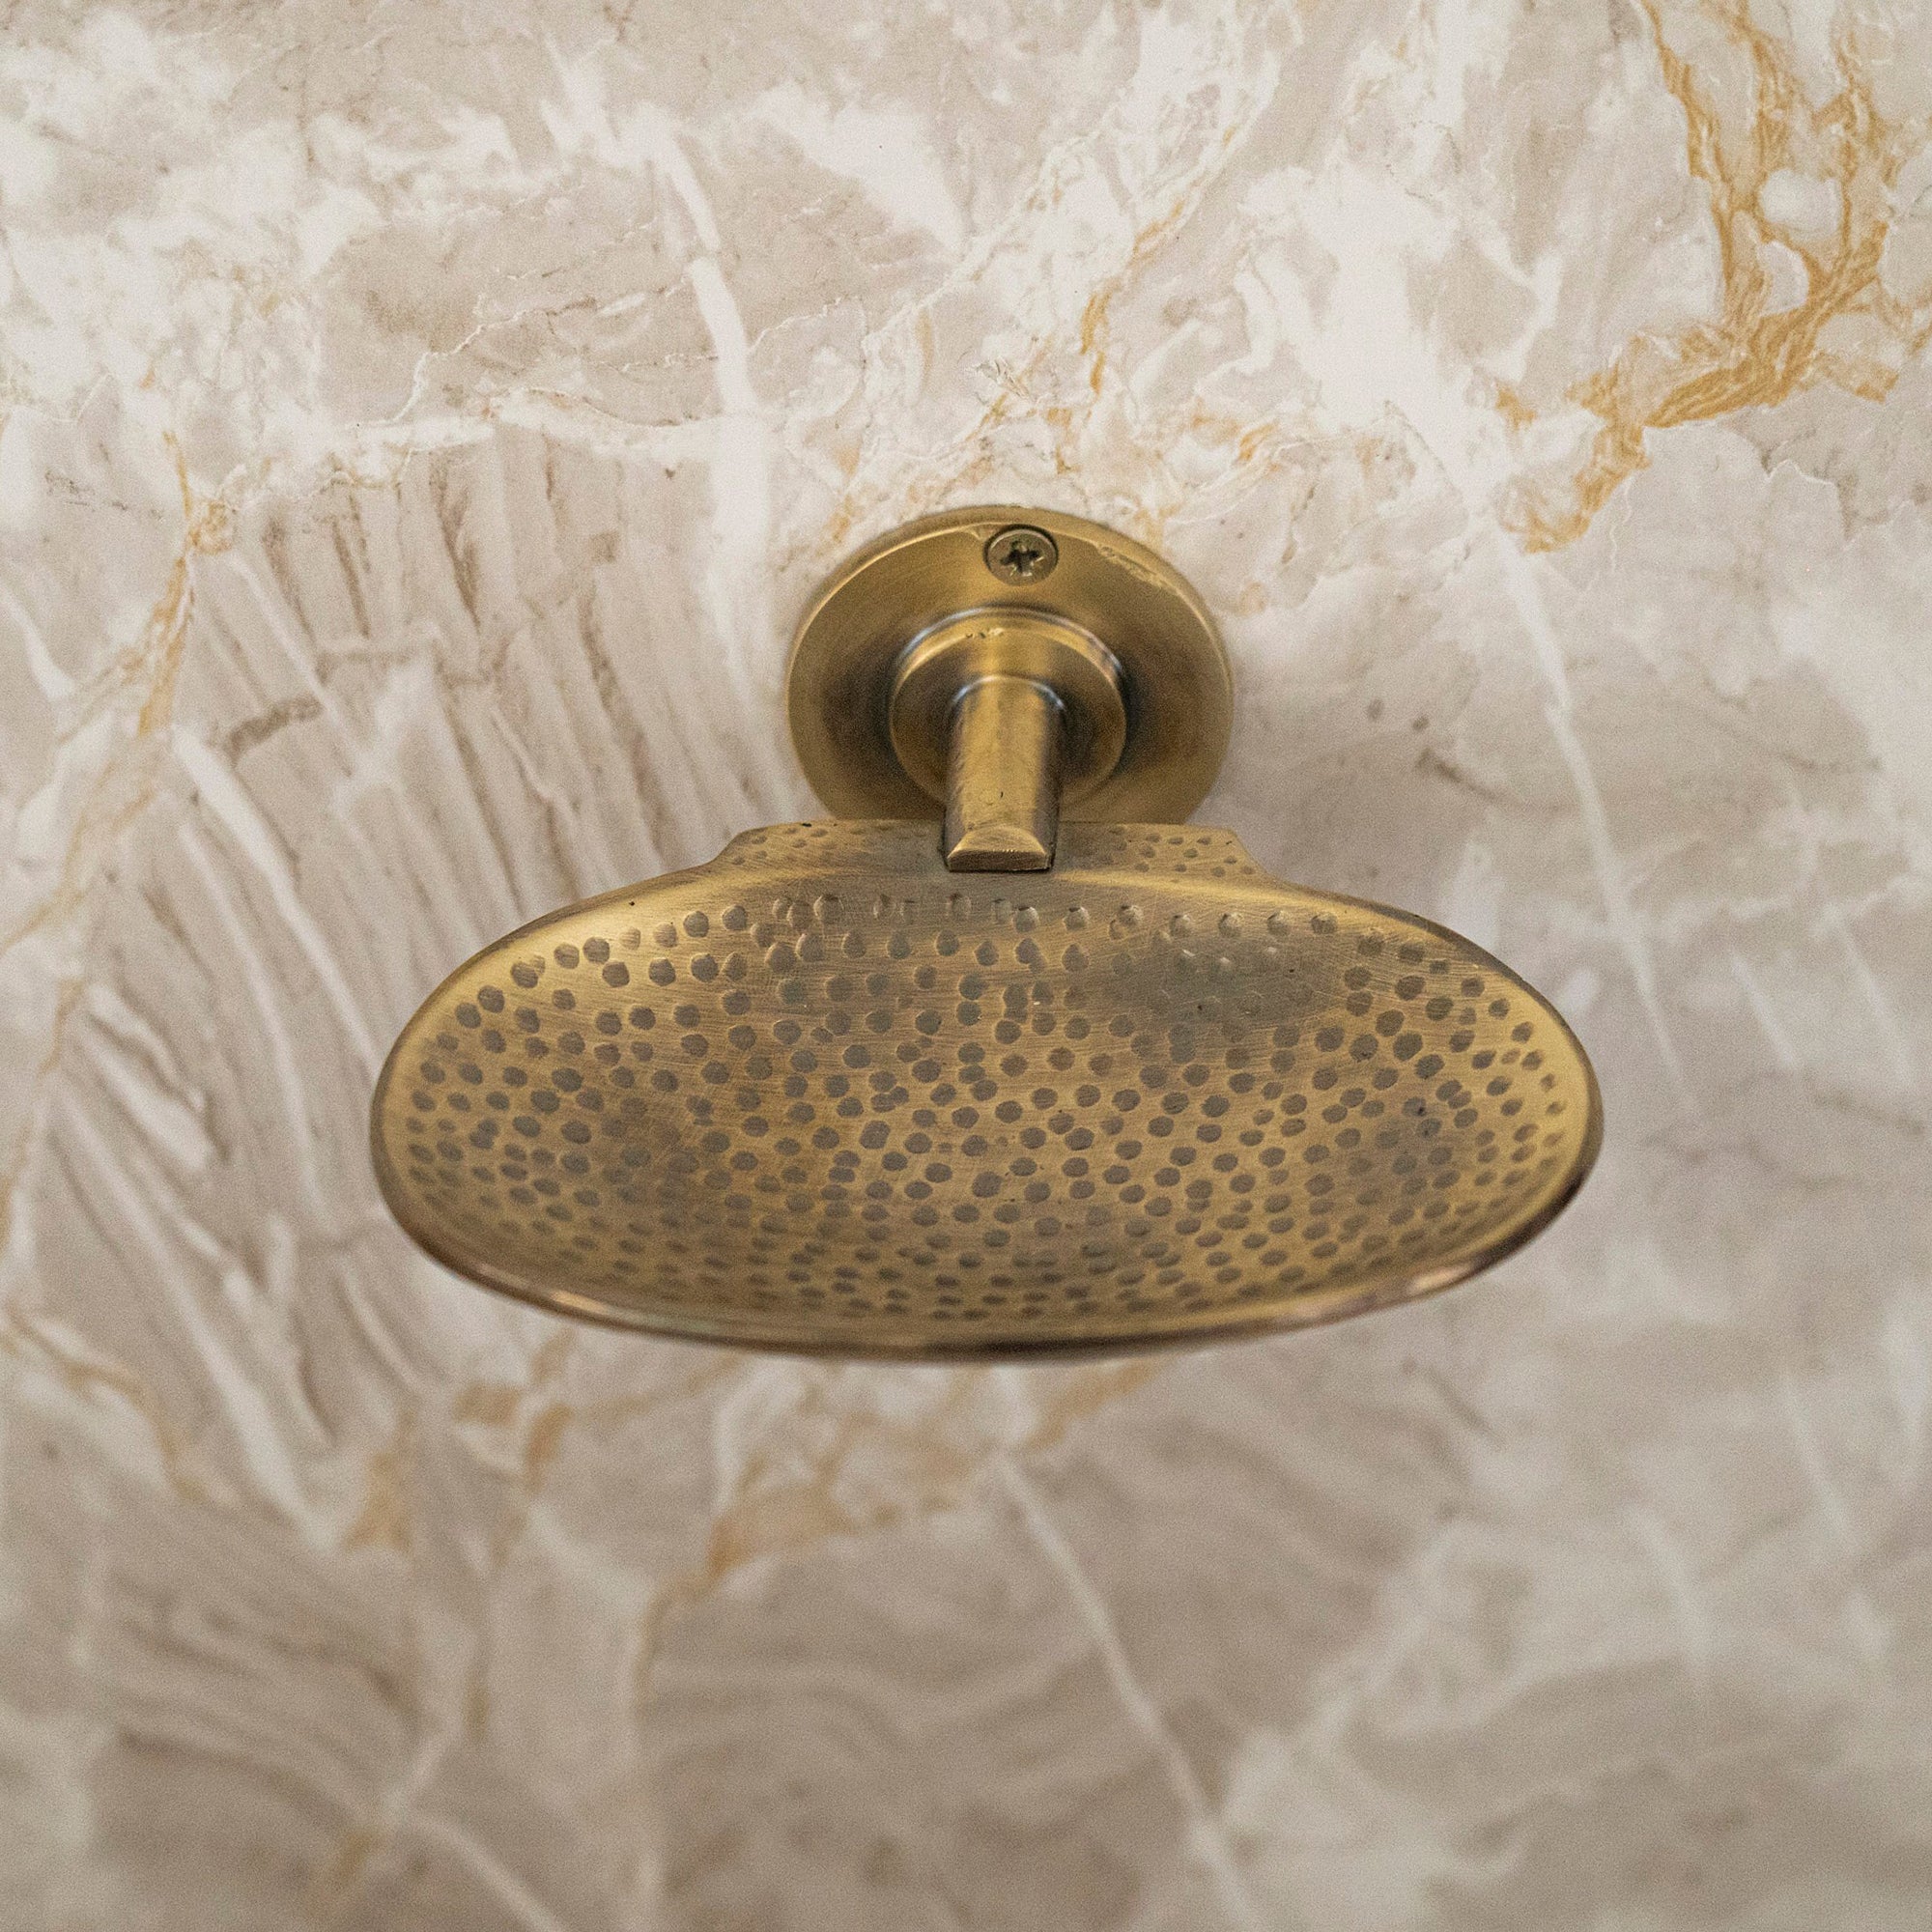 Antique Brass Soap Dish, Wall Mounted Soap Holder